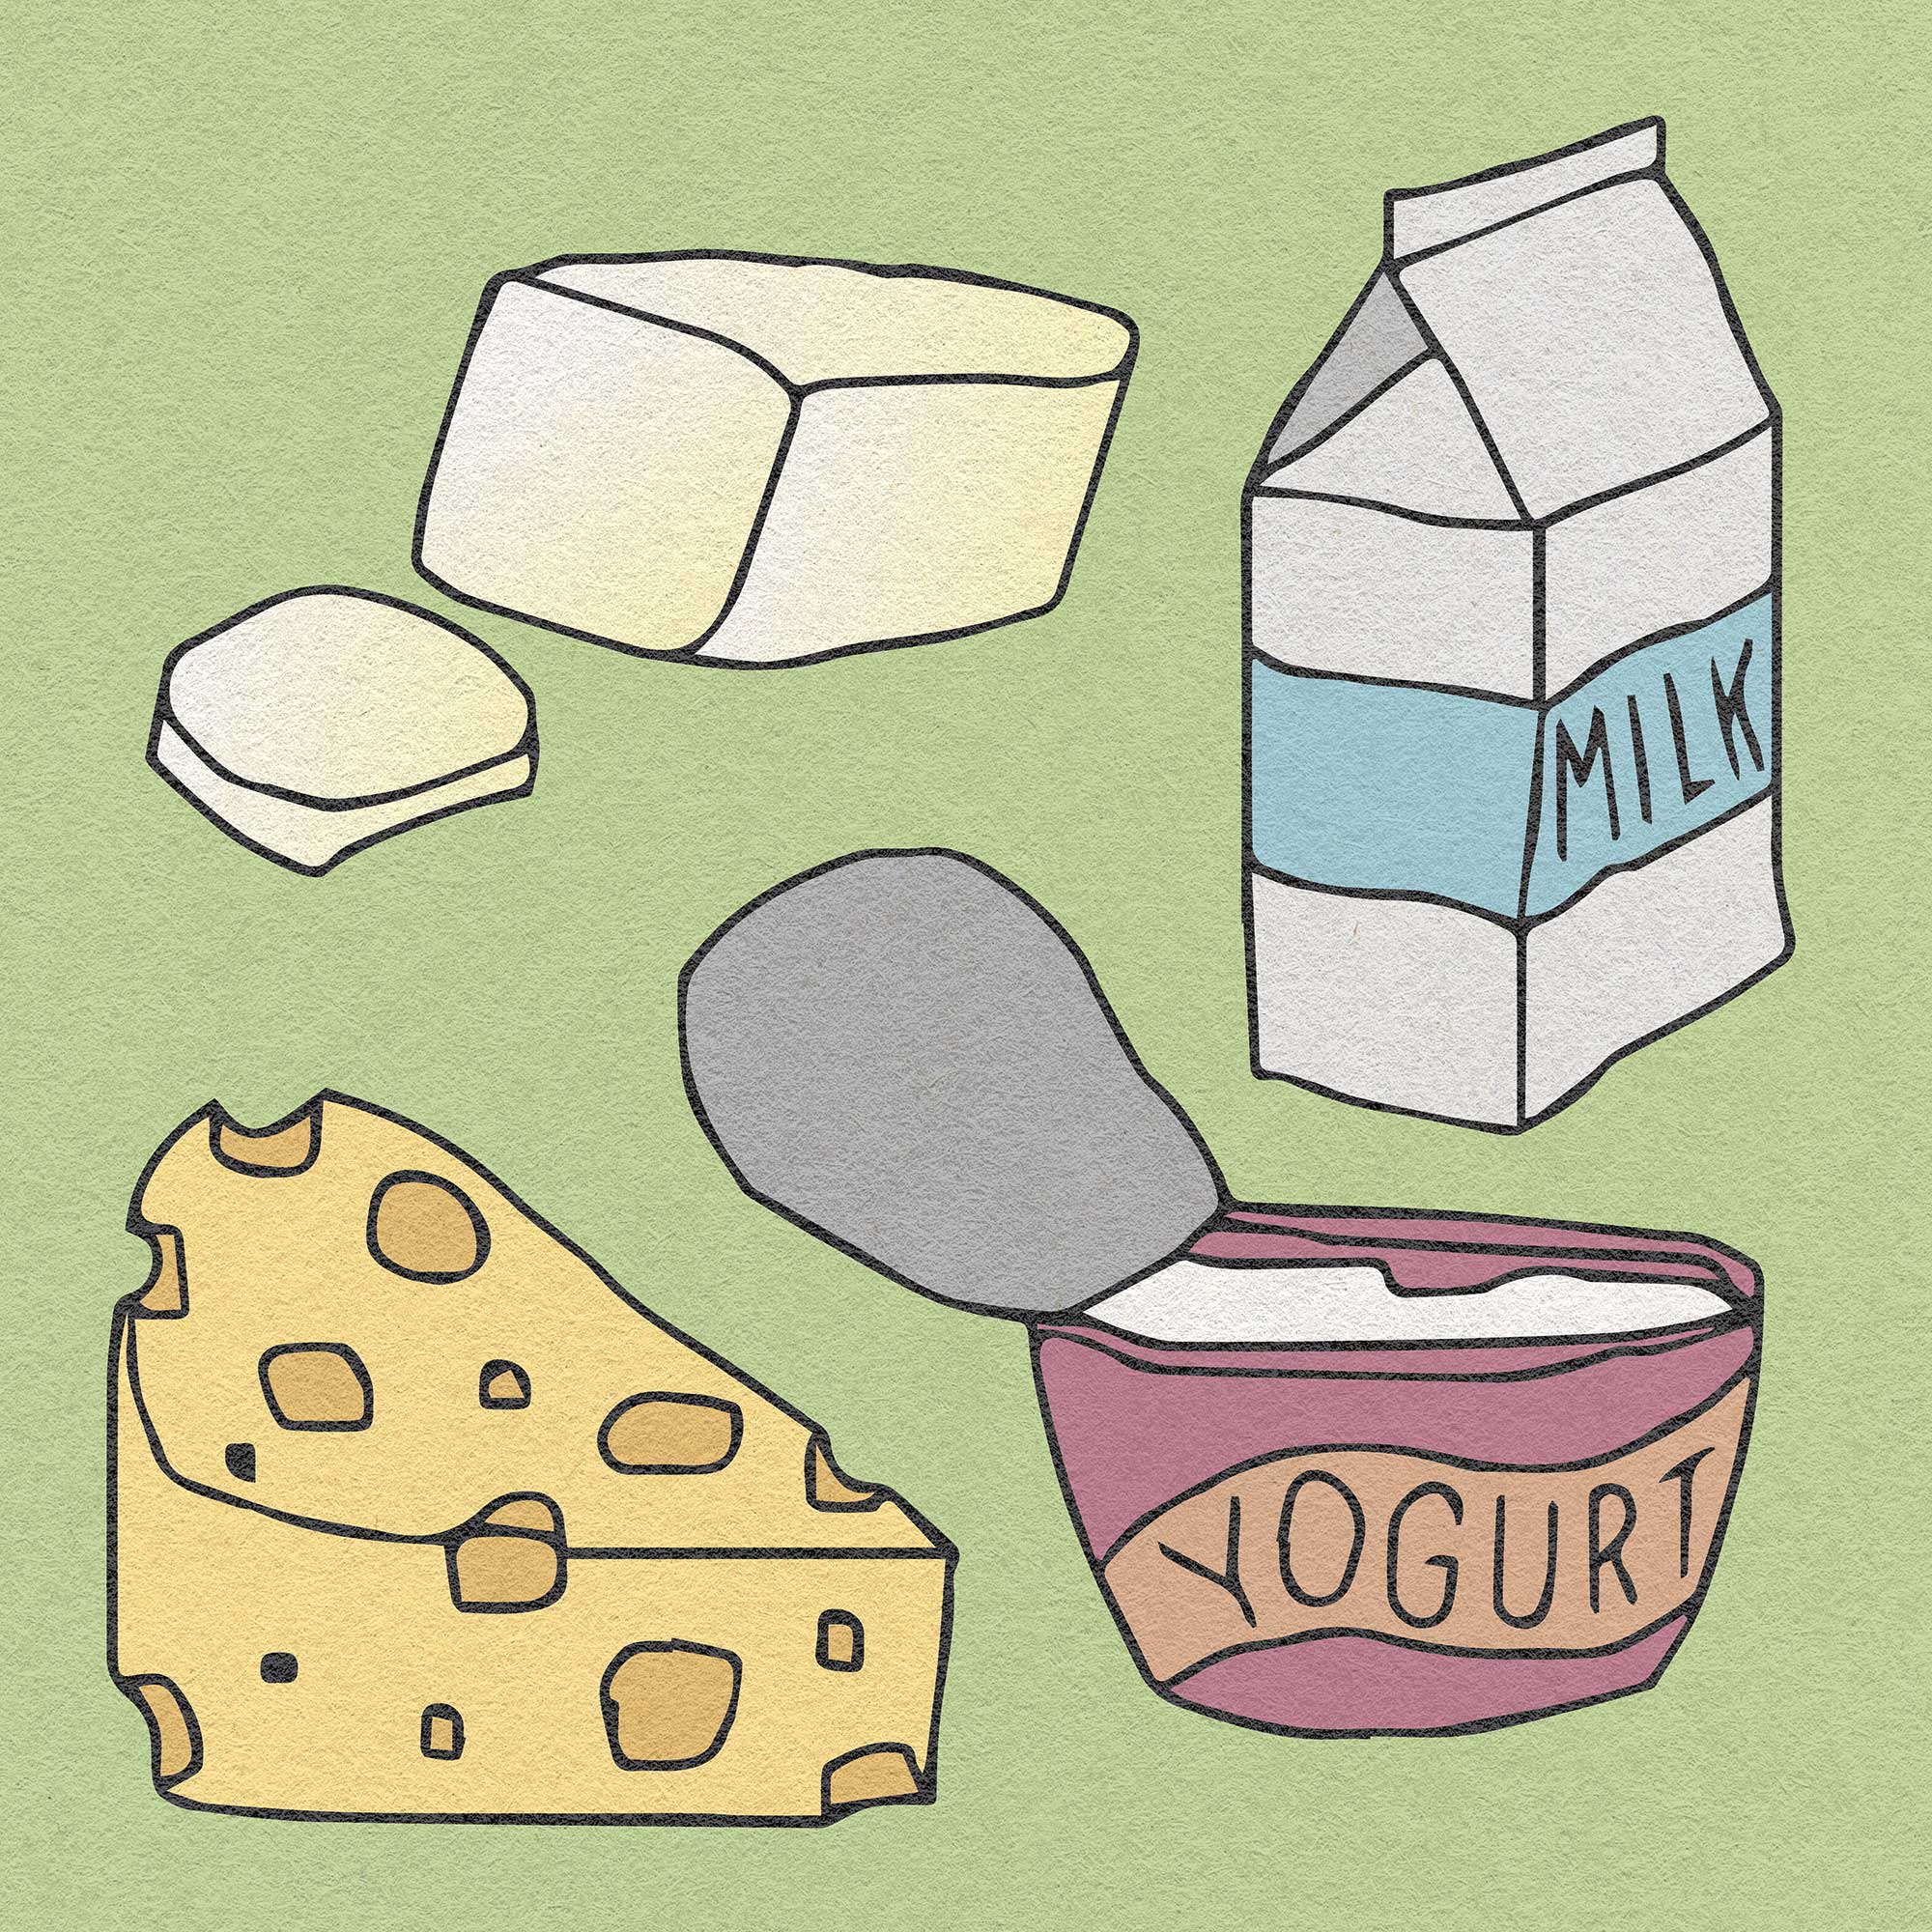 Illustration of gluten-free dairy food options, on a green background